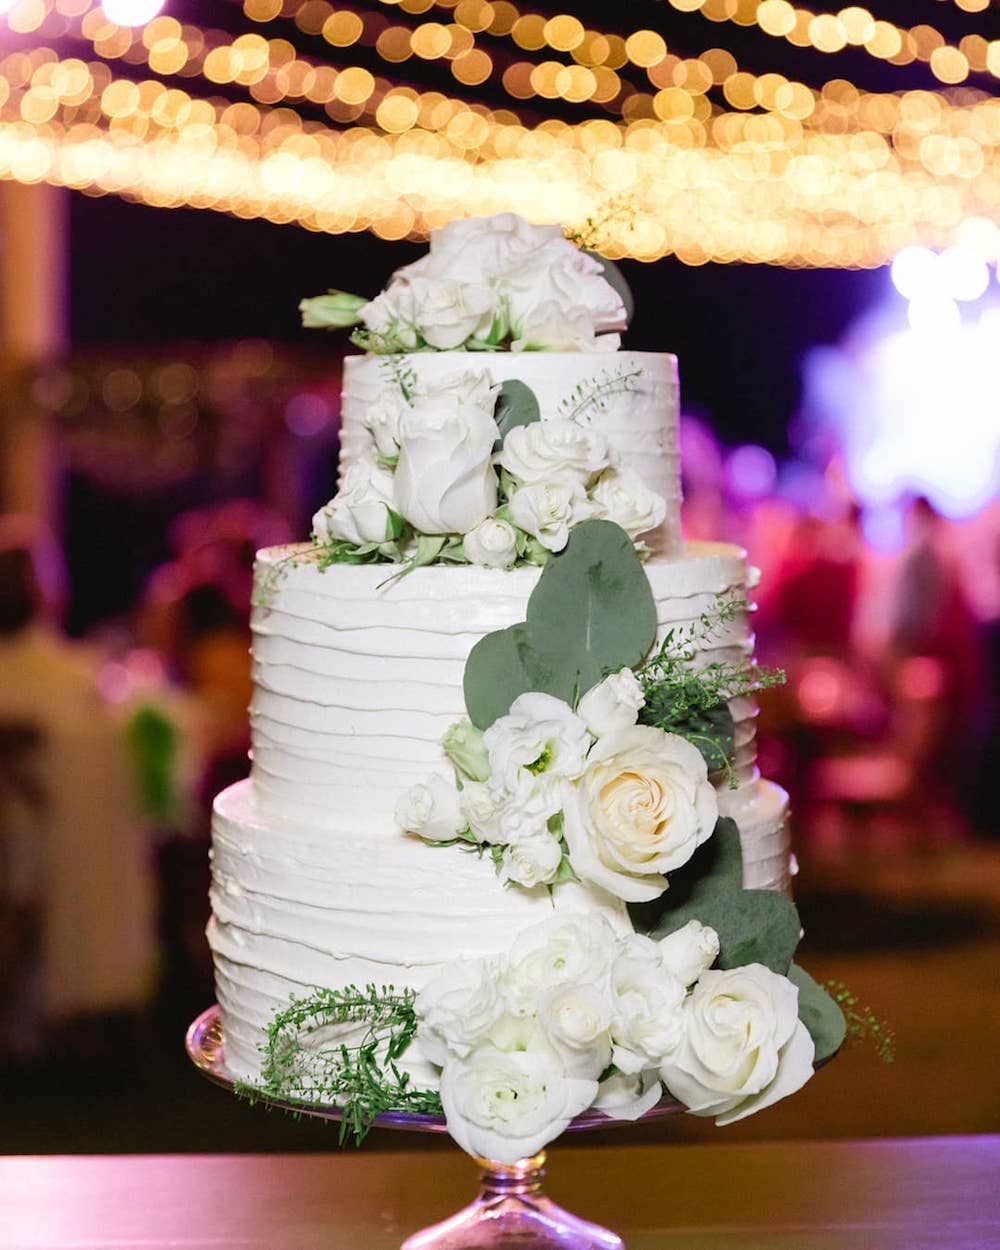 10 Beautiful Cake Designs For Your Wedding